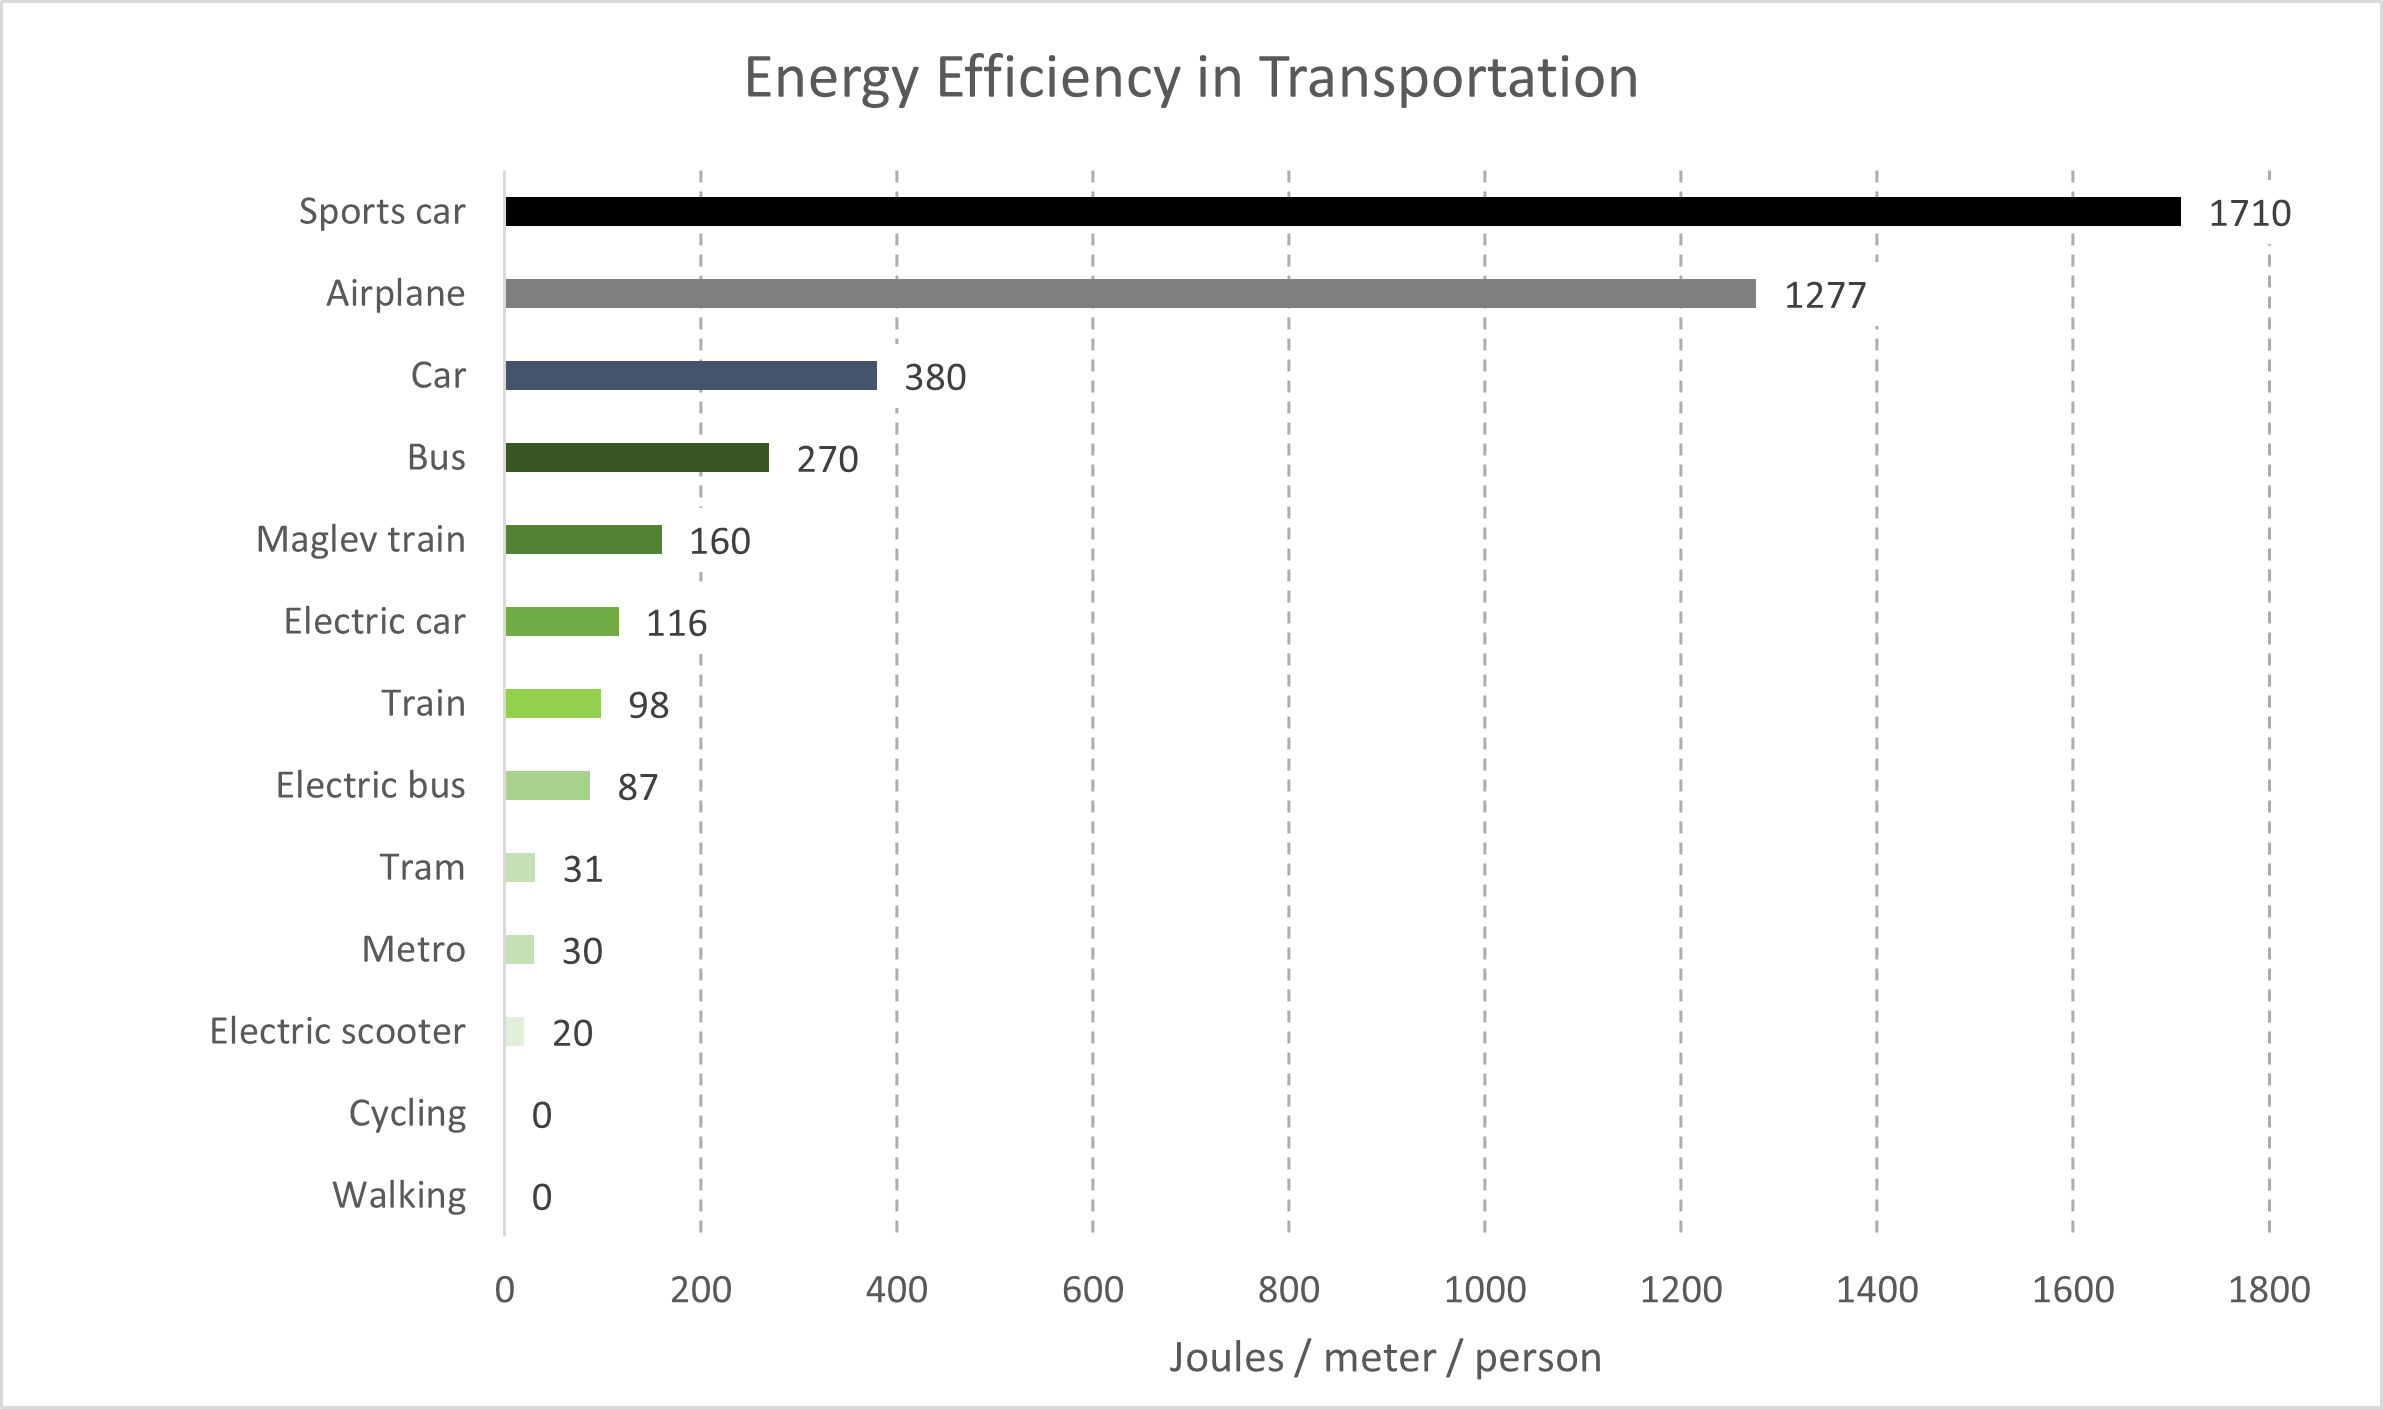 A horizontal bar chart showing modes of transportation from walking (0) to taking a commercial air flight (1277) showing the energy used per meter transported per person.